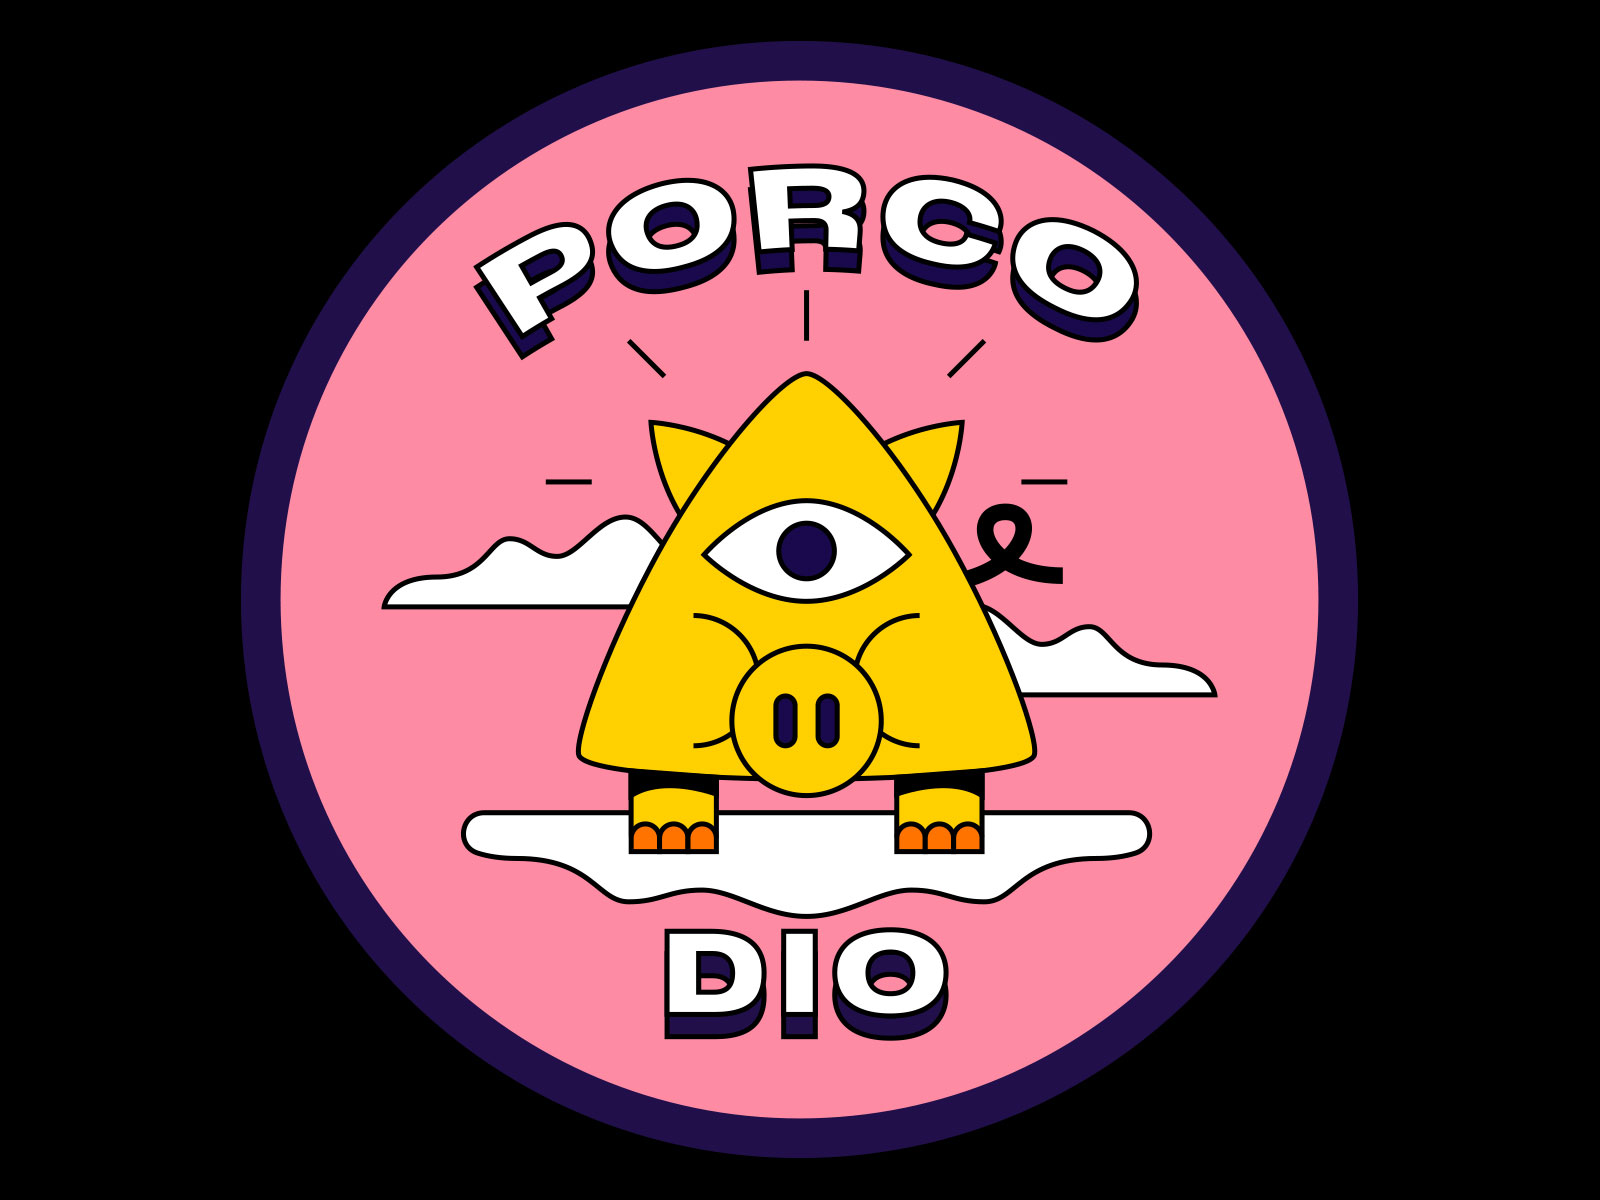 Porco Dio by Dark Penguin on Dribbble